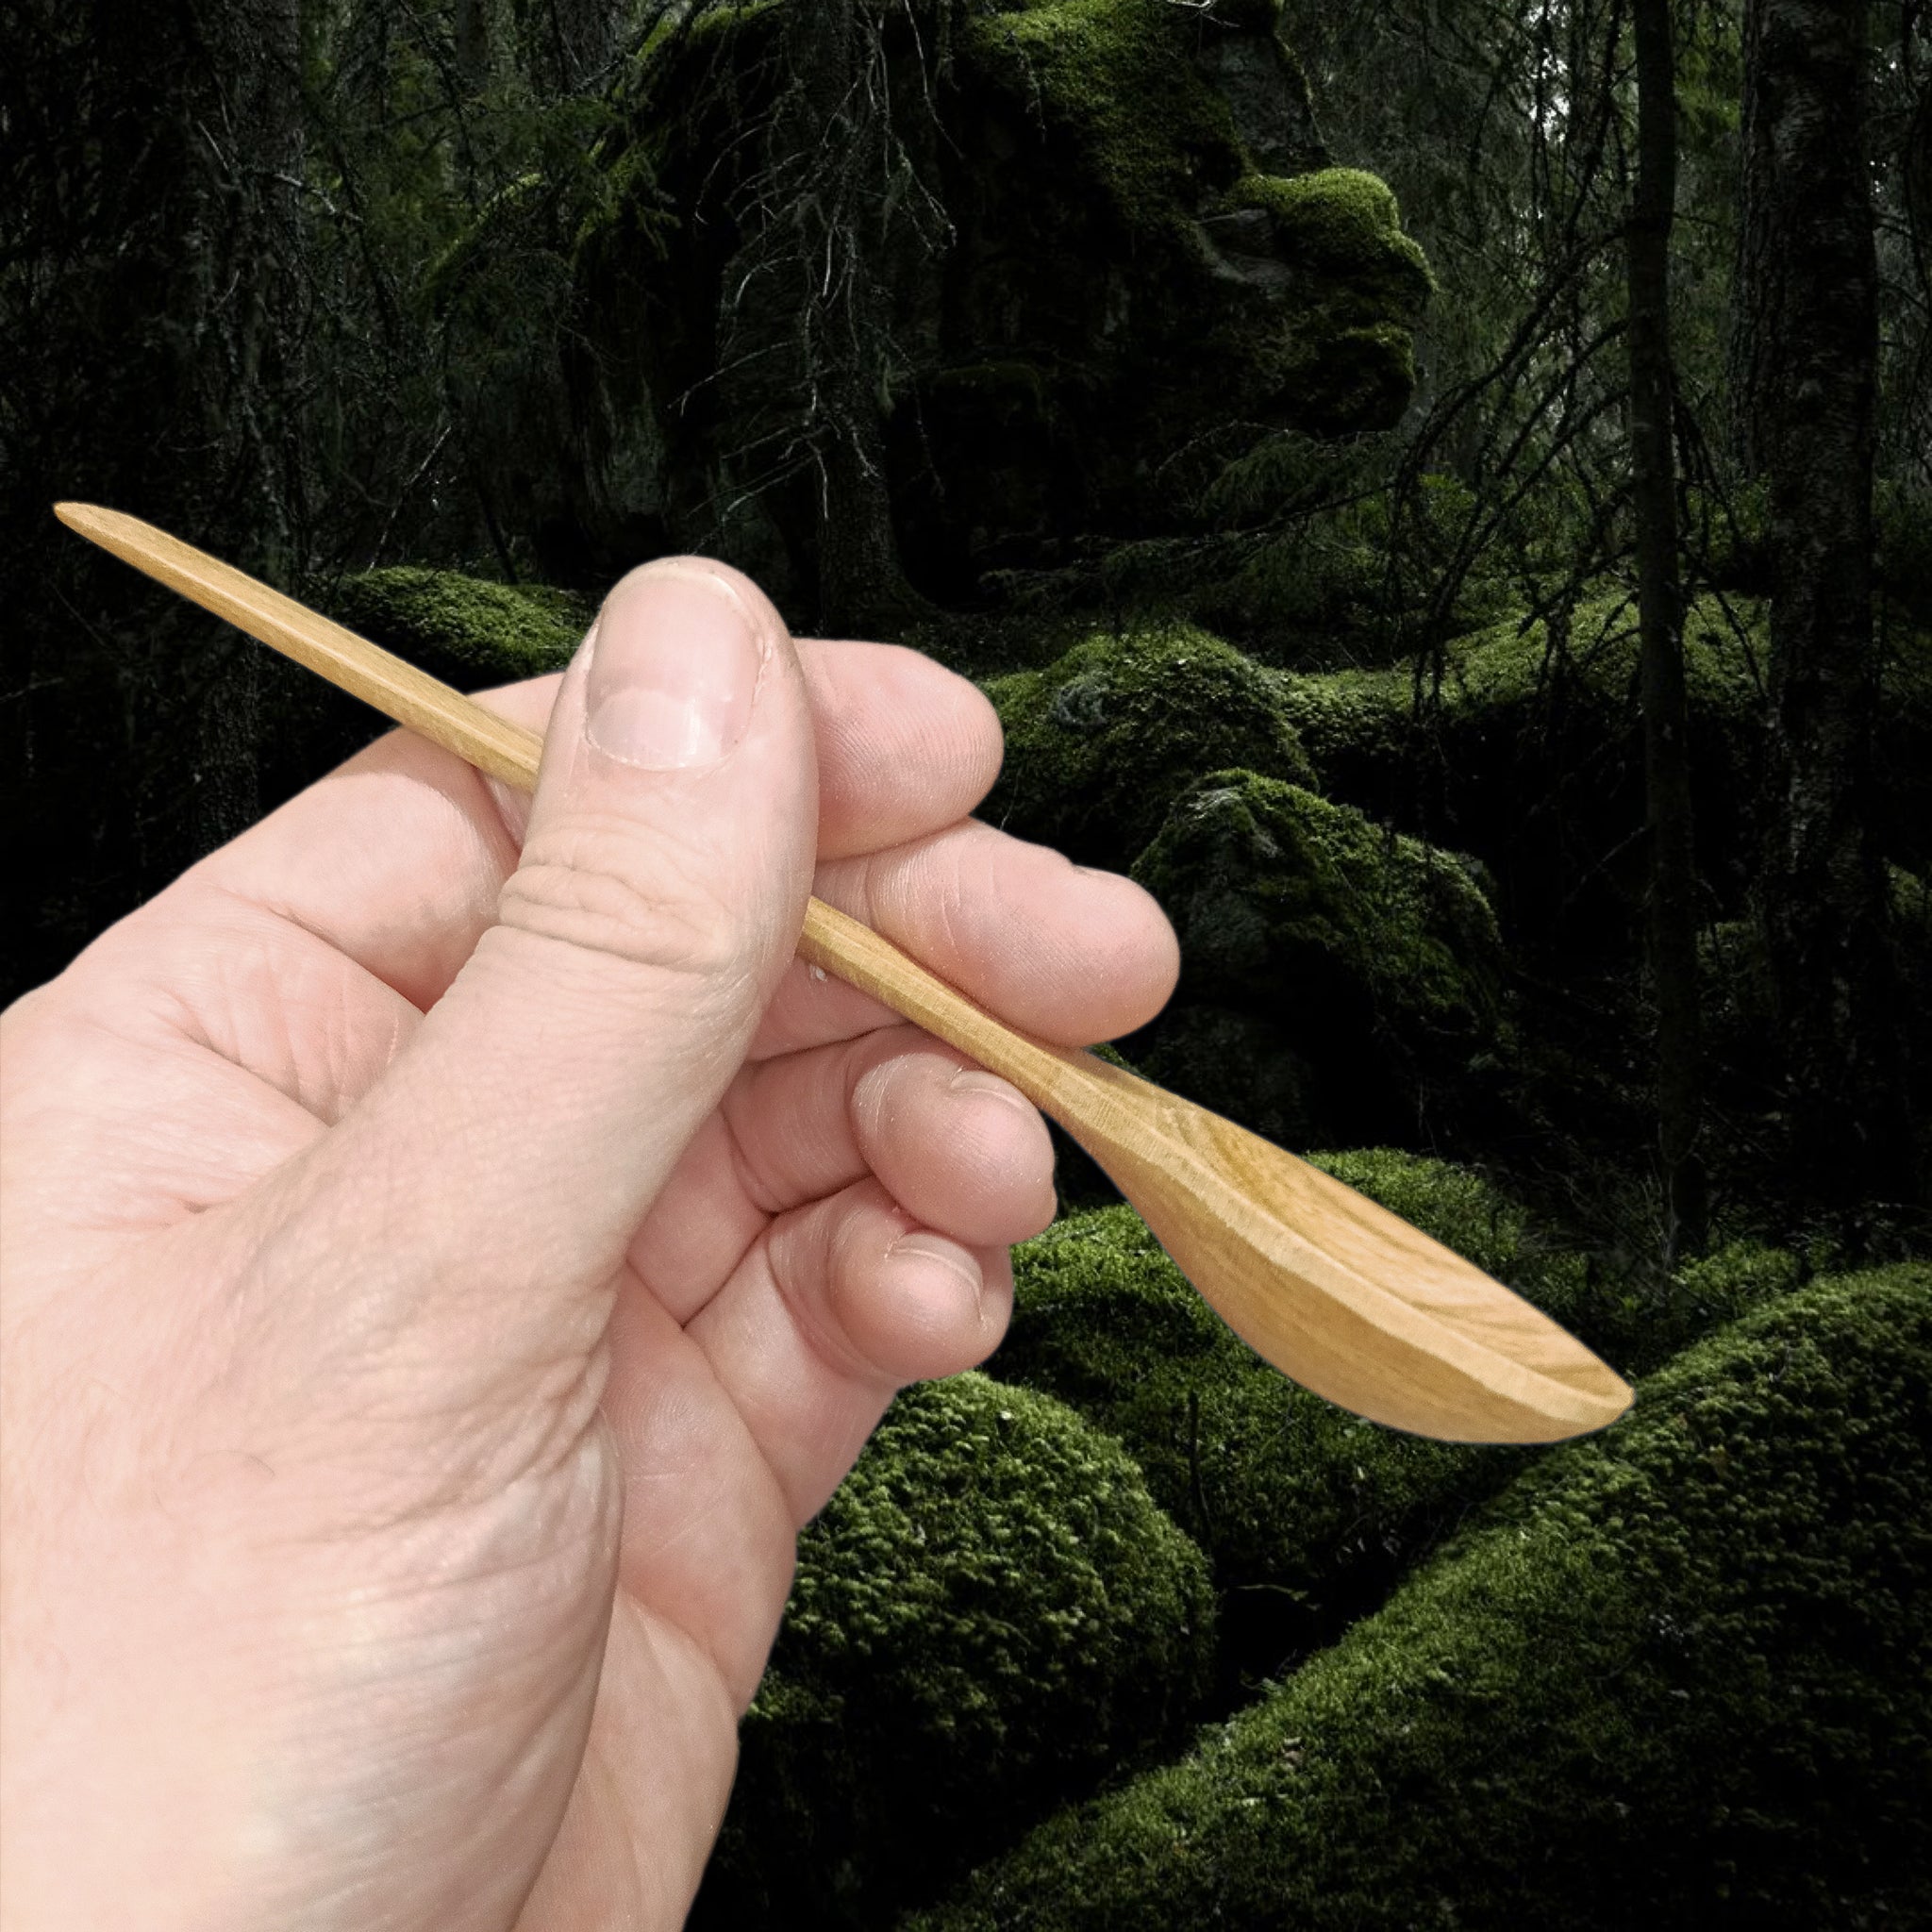 Cherry Wood Viking / Medieval Spoon in Hand - Side View